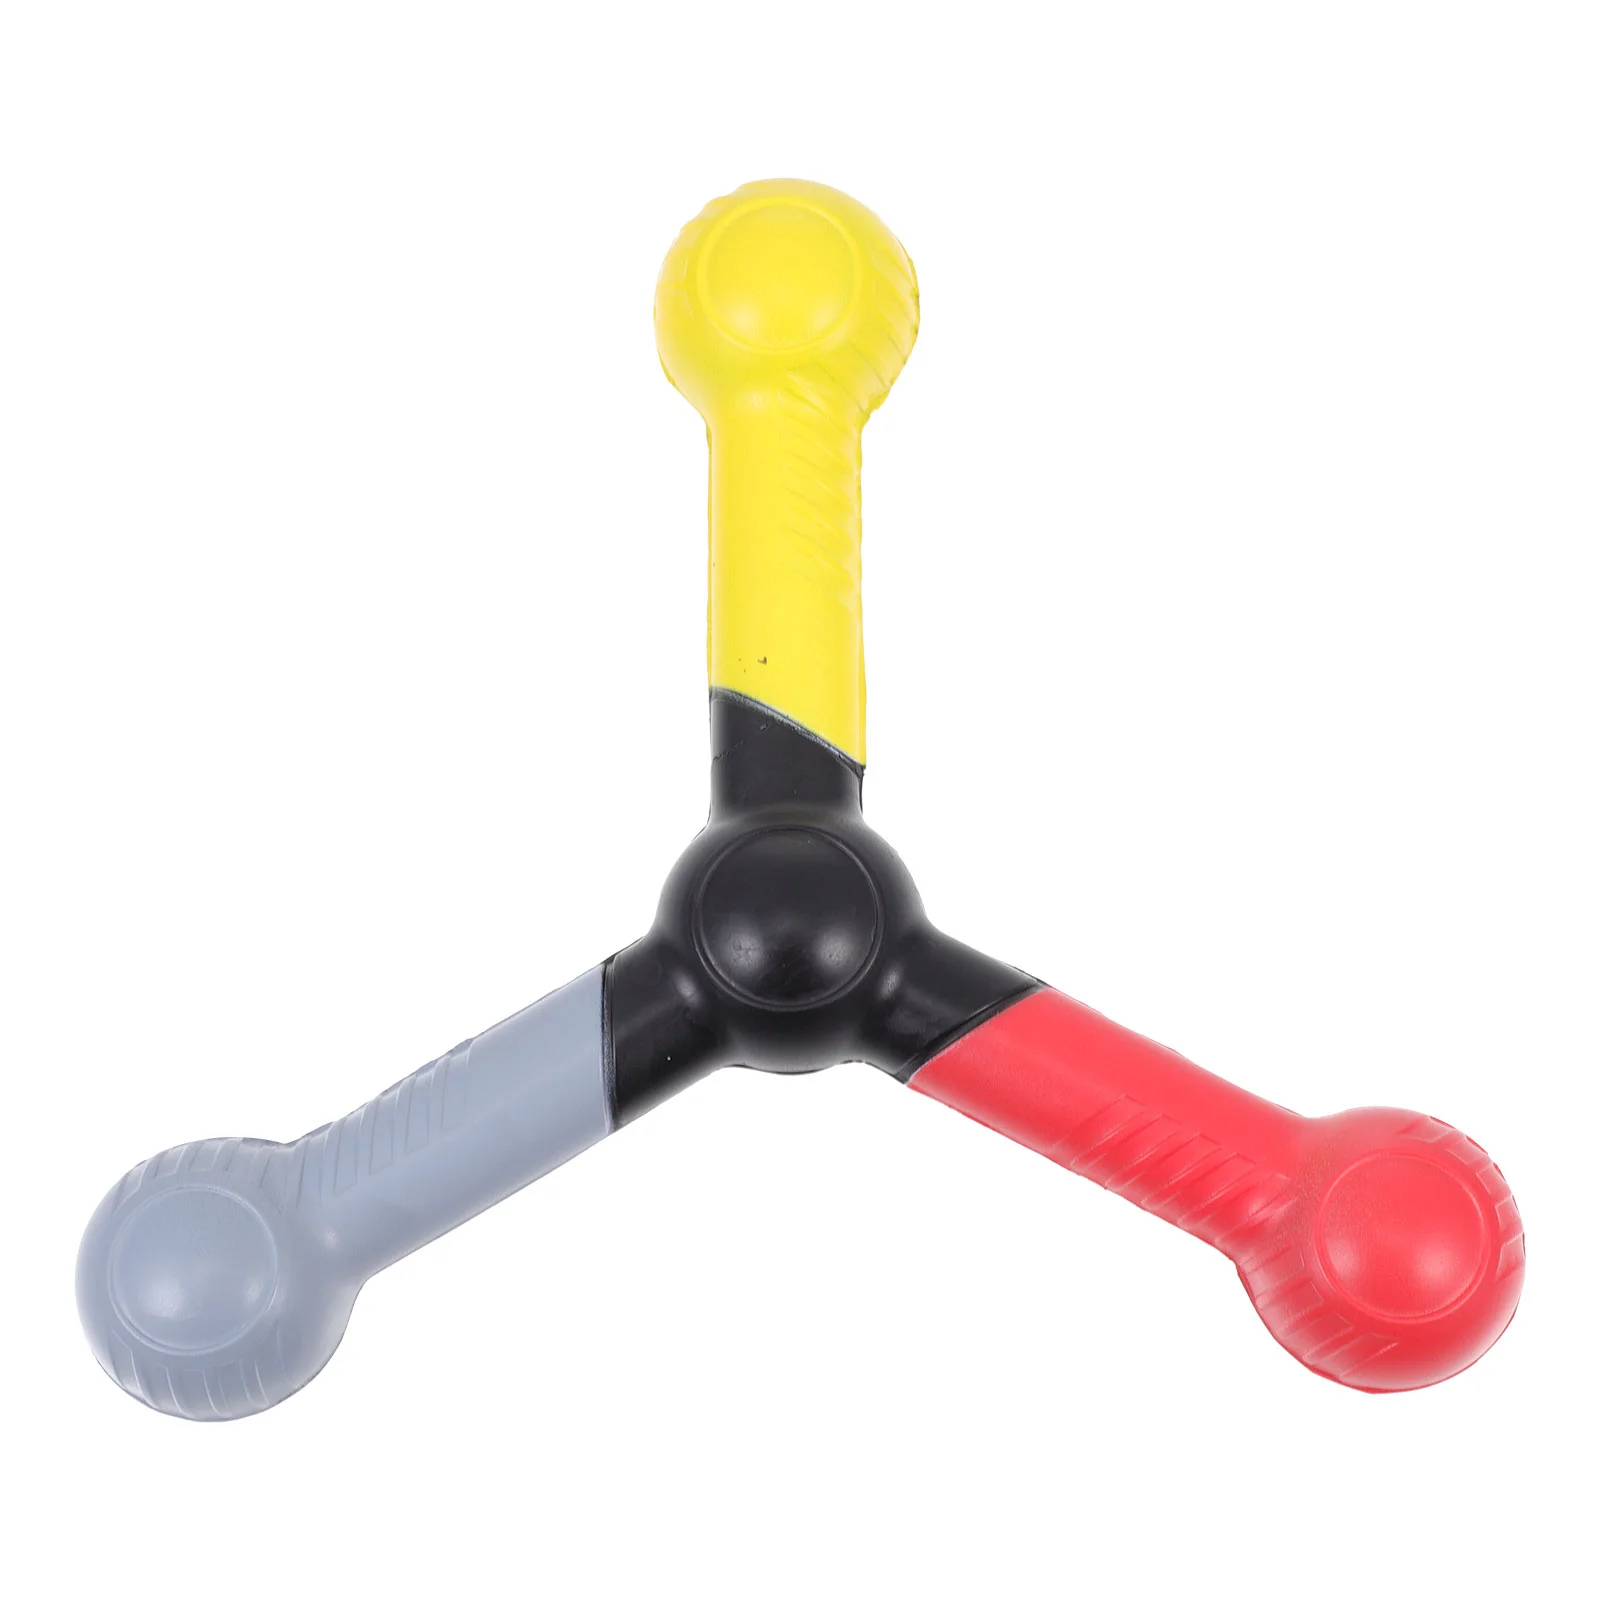 

Reaction Training Stick Hand-eye Coordination Ability Improving Tool Toy Agility Reflex Trainer Catching